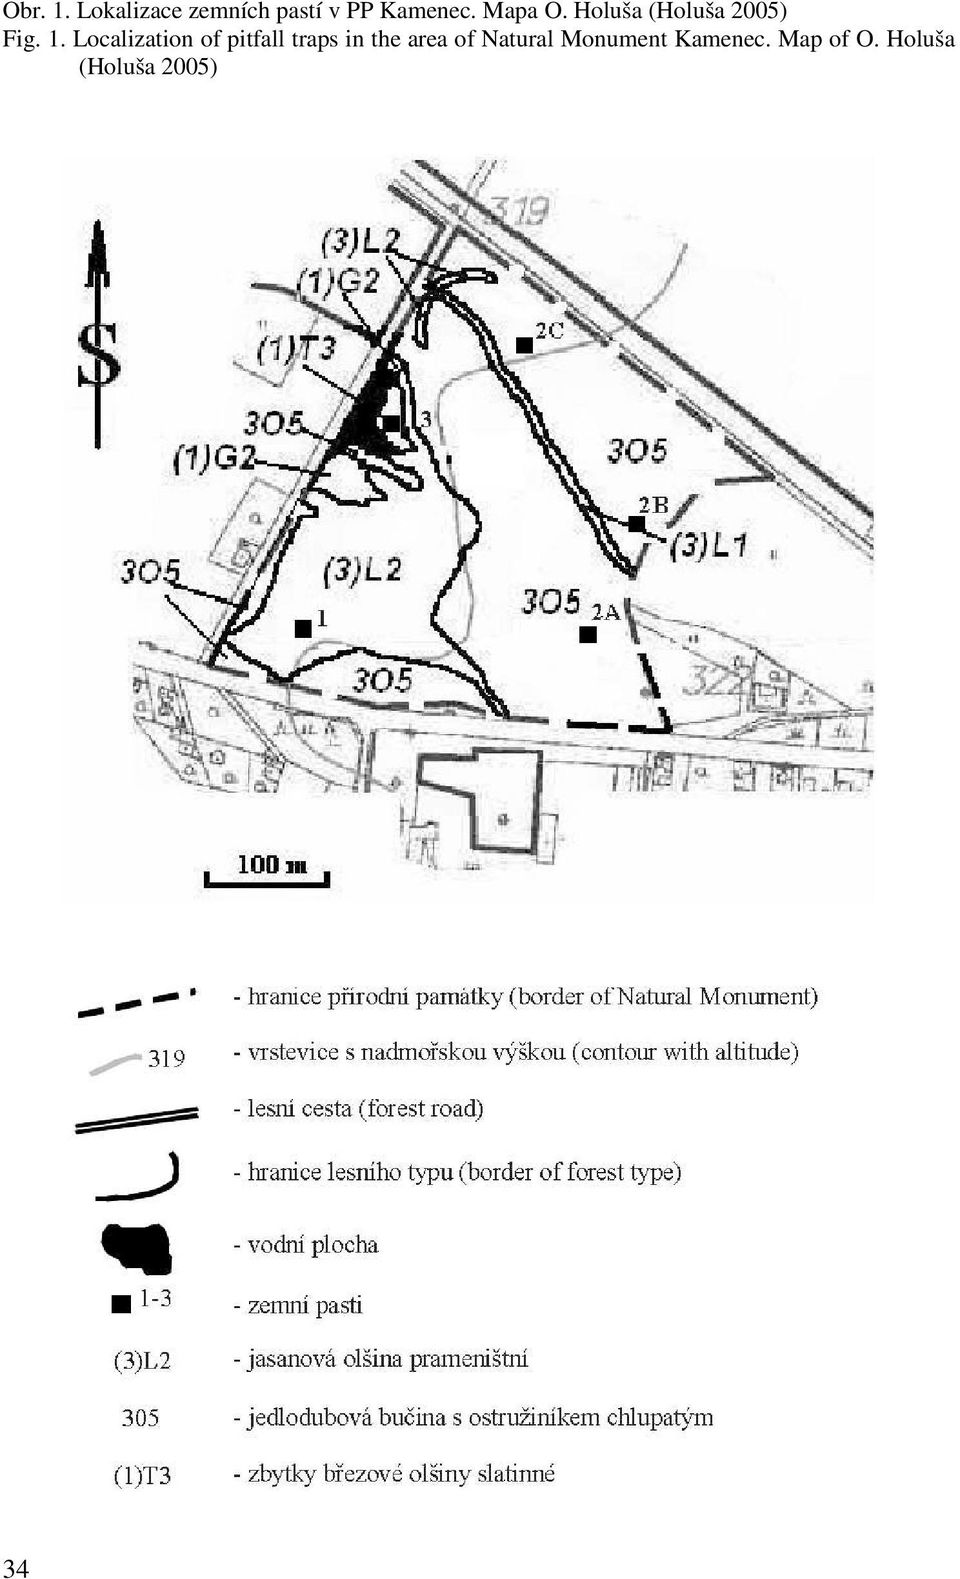 Localization of pitfall traps in the area of